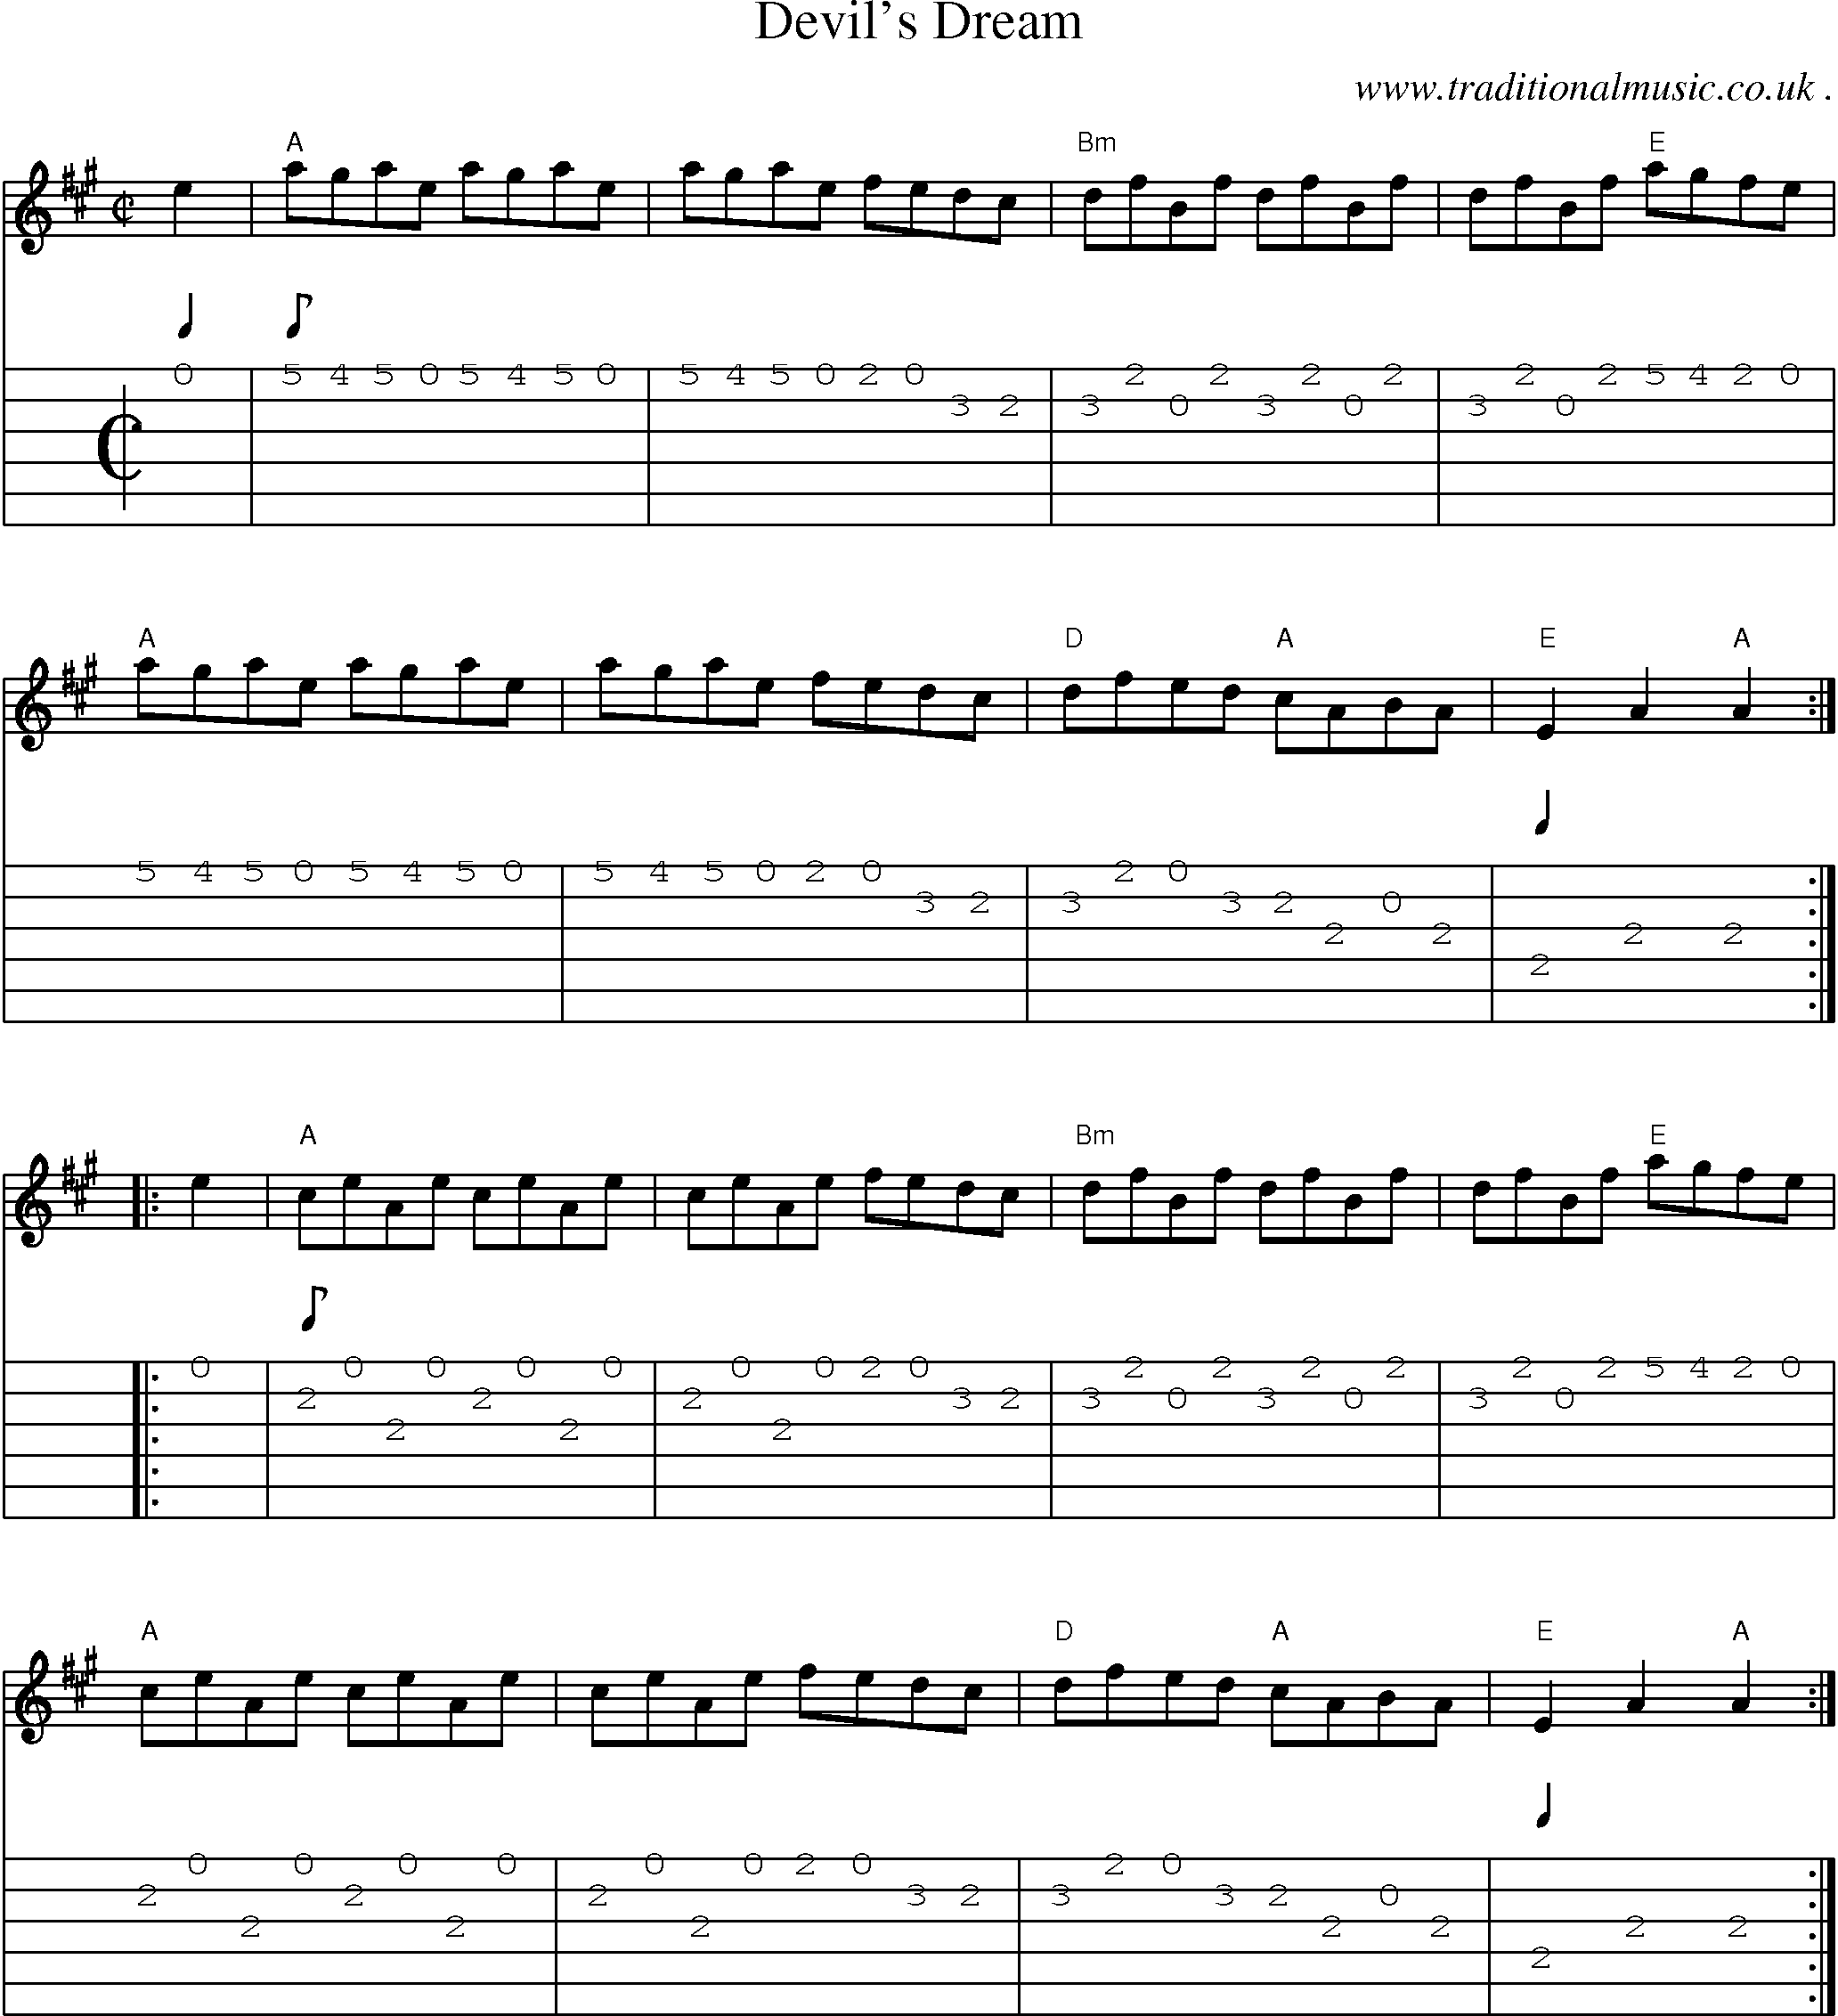 Music Score and Guitar Tabs for Devils Dream